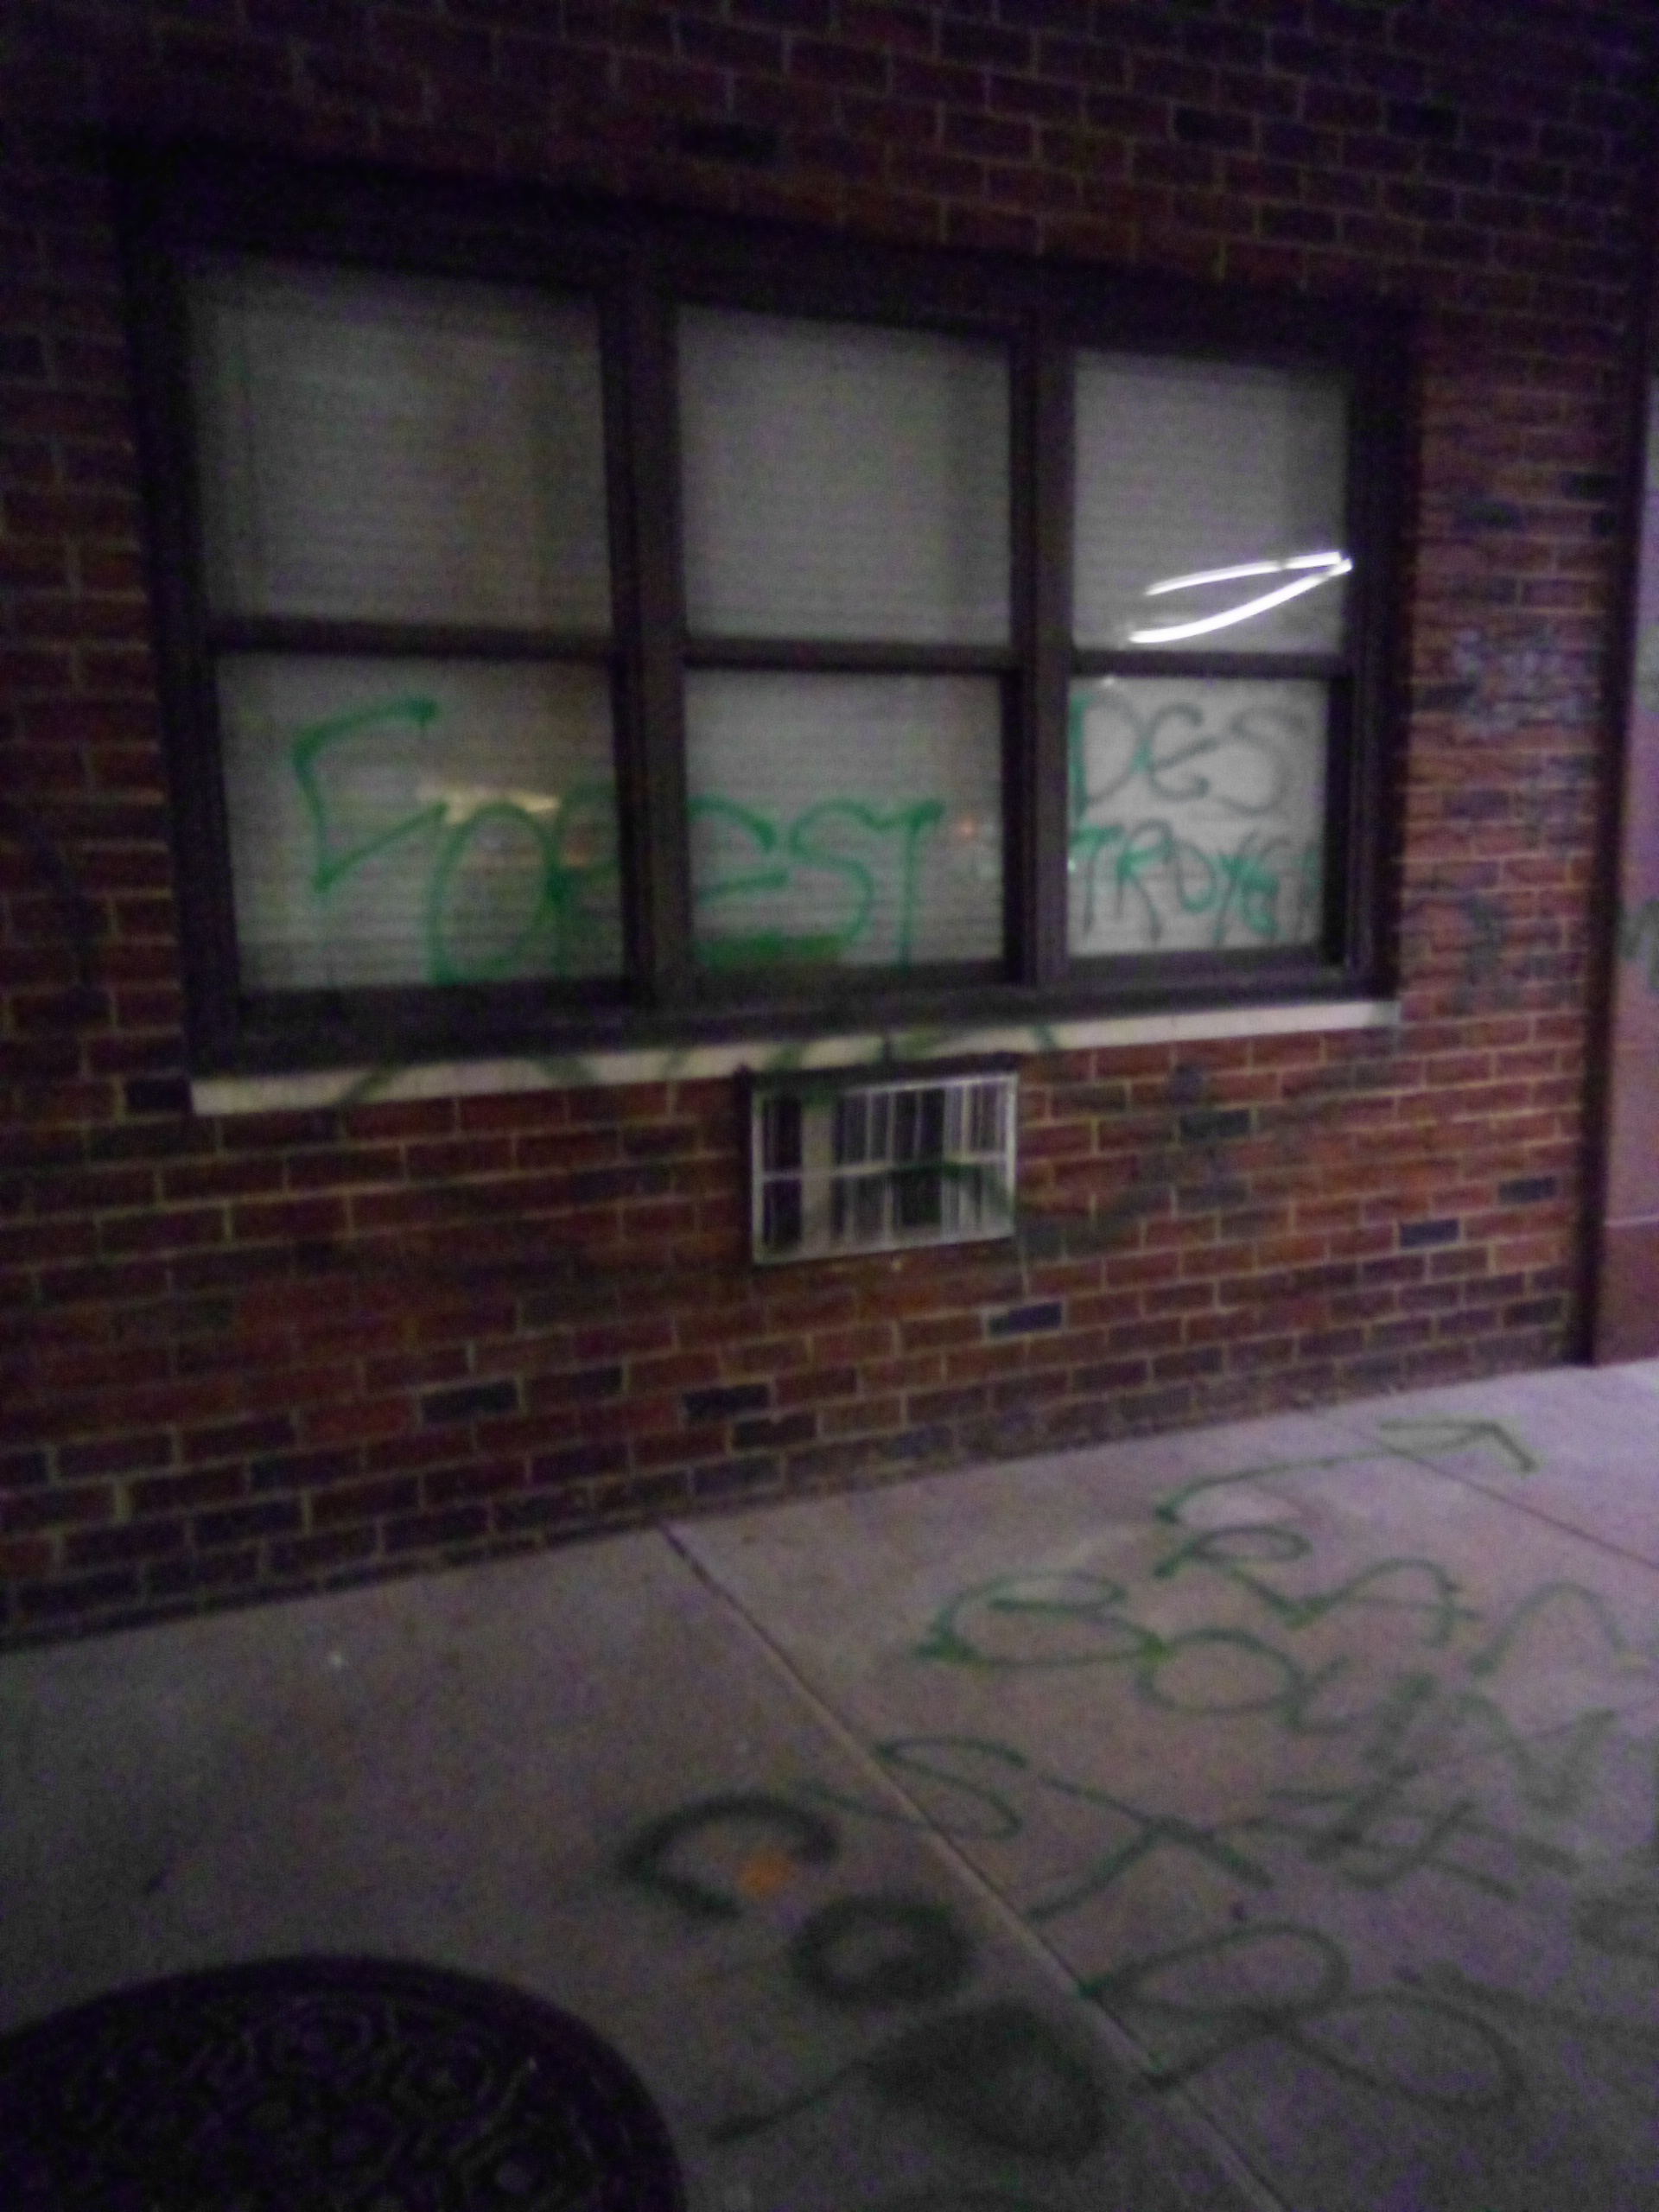 A window on a brick wall is spray painted "FOREST DESTROYER" in green.